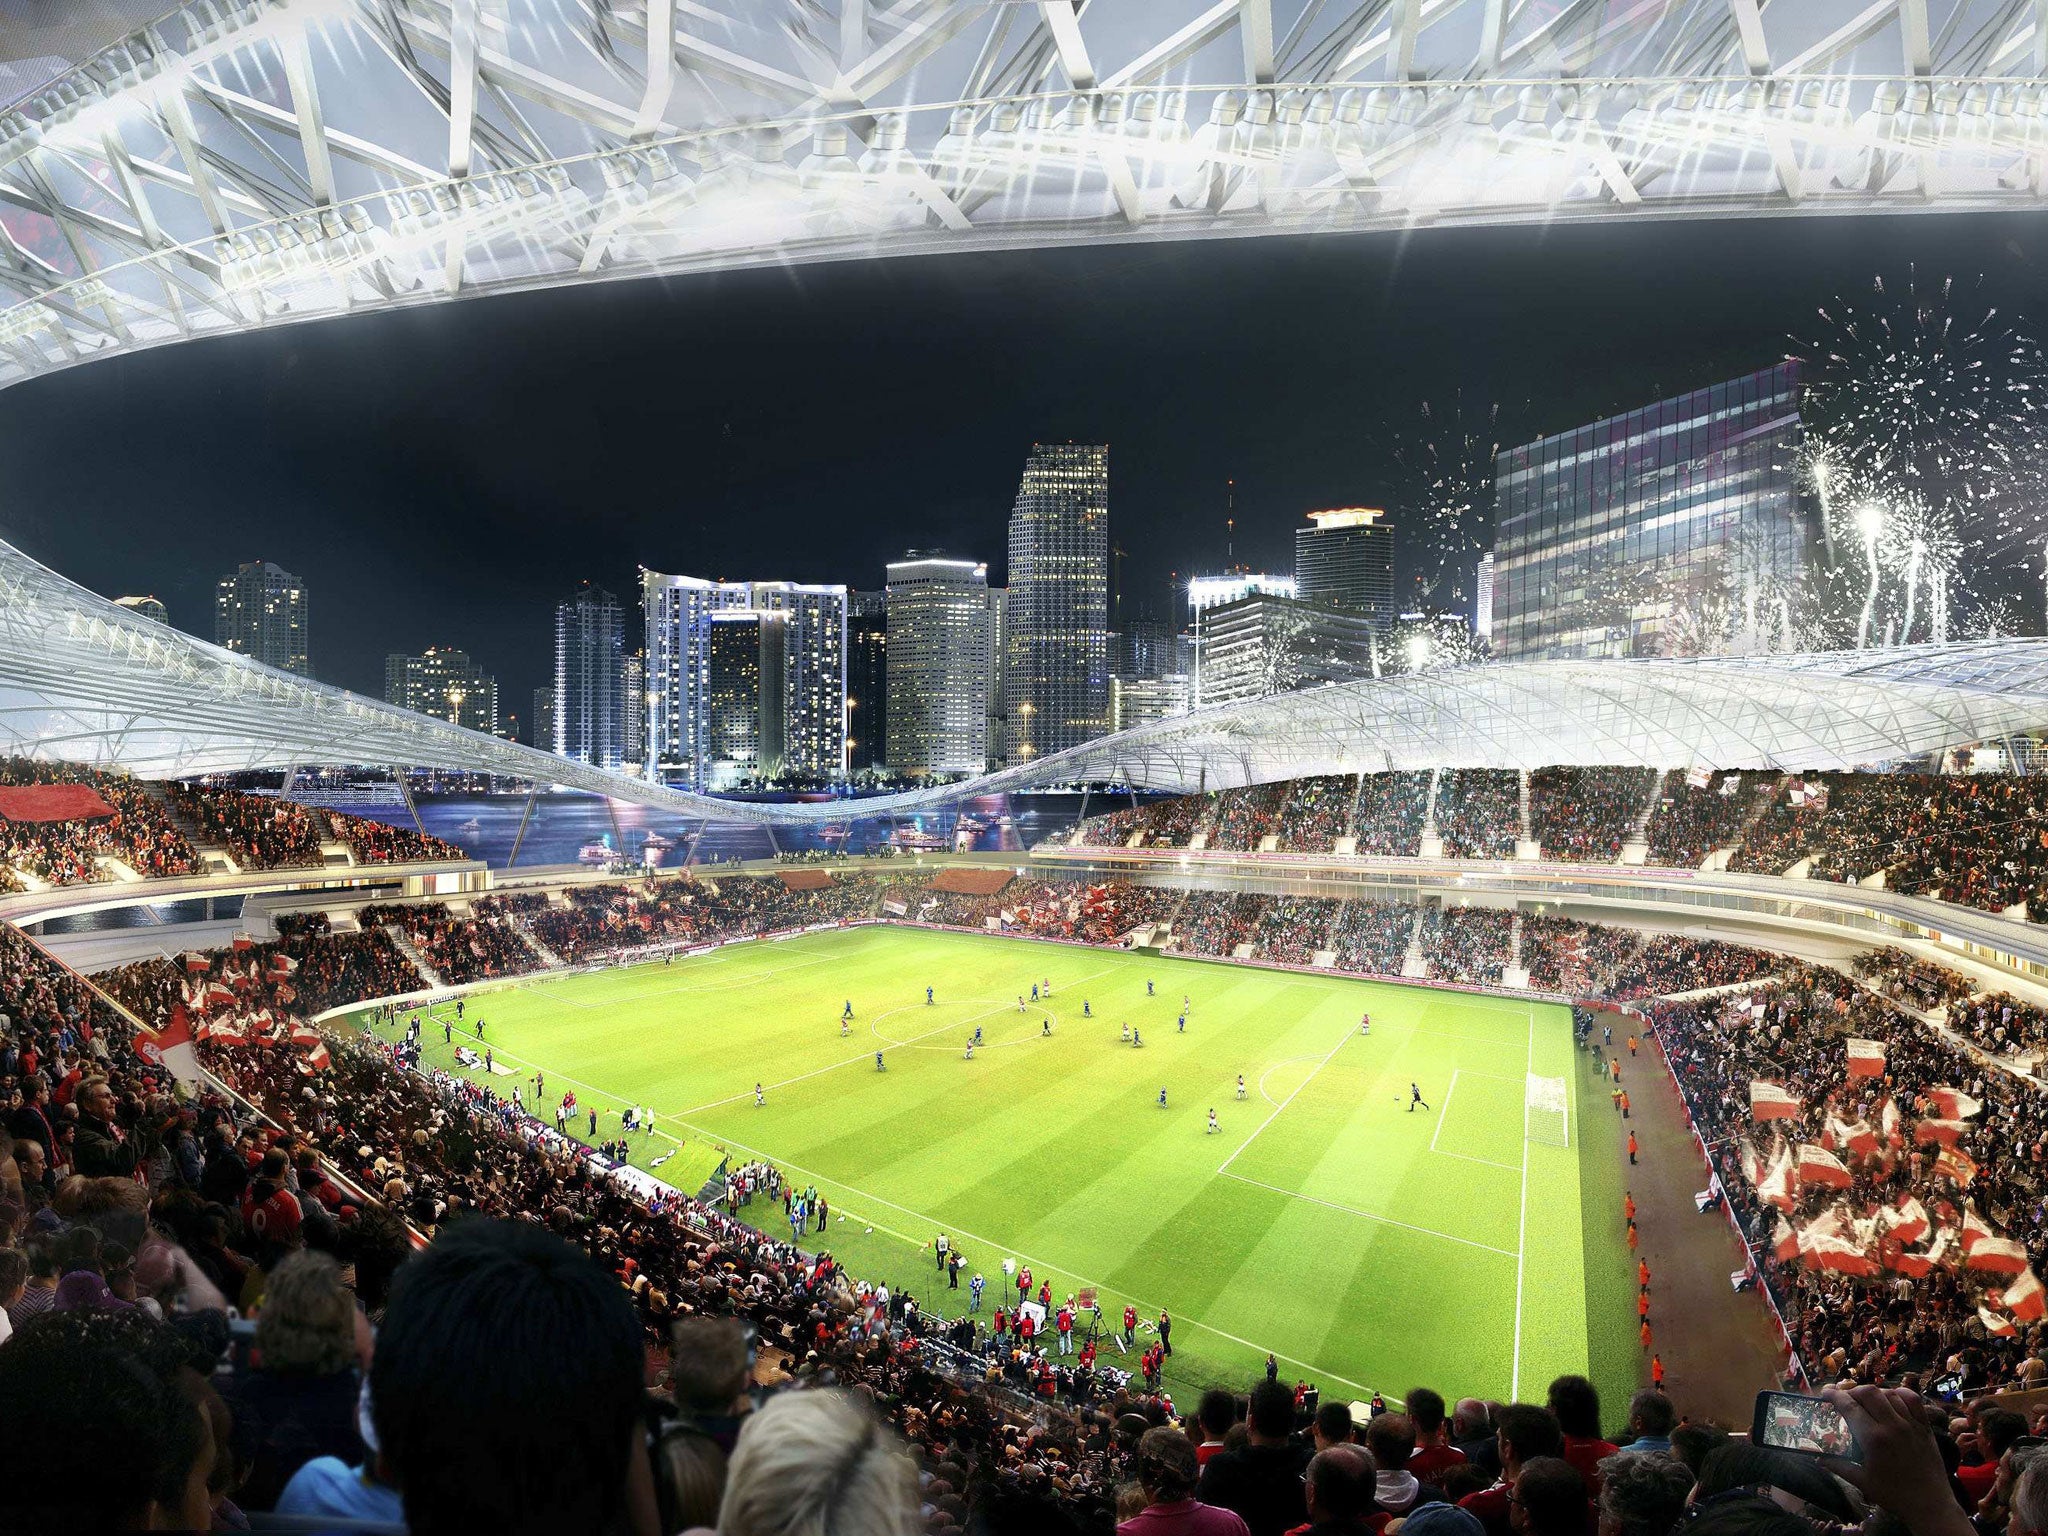 A proposed stadium for a Major League Soccer (MLS) team backed by retired English soccer star David Beckham of the group's preferred location for the arena seated in between Biscayne Bay and downtown Miami, Florida